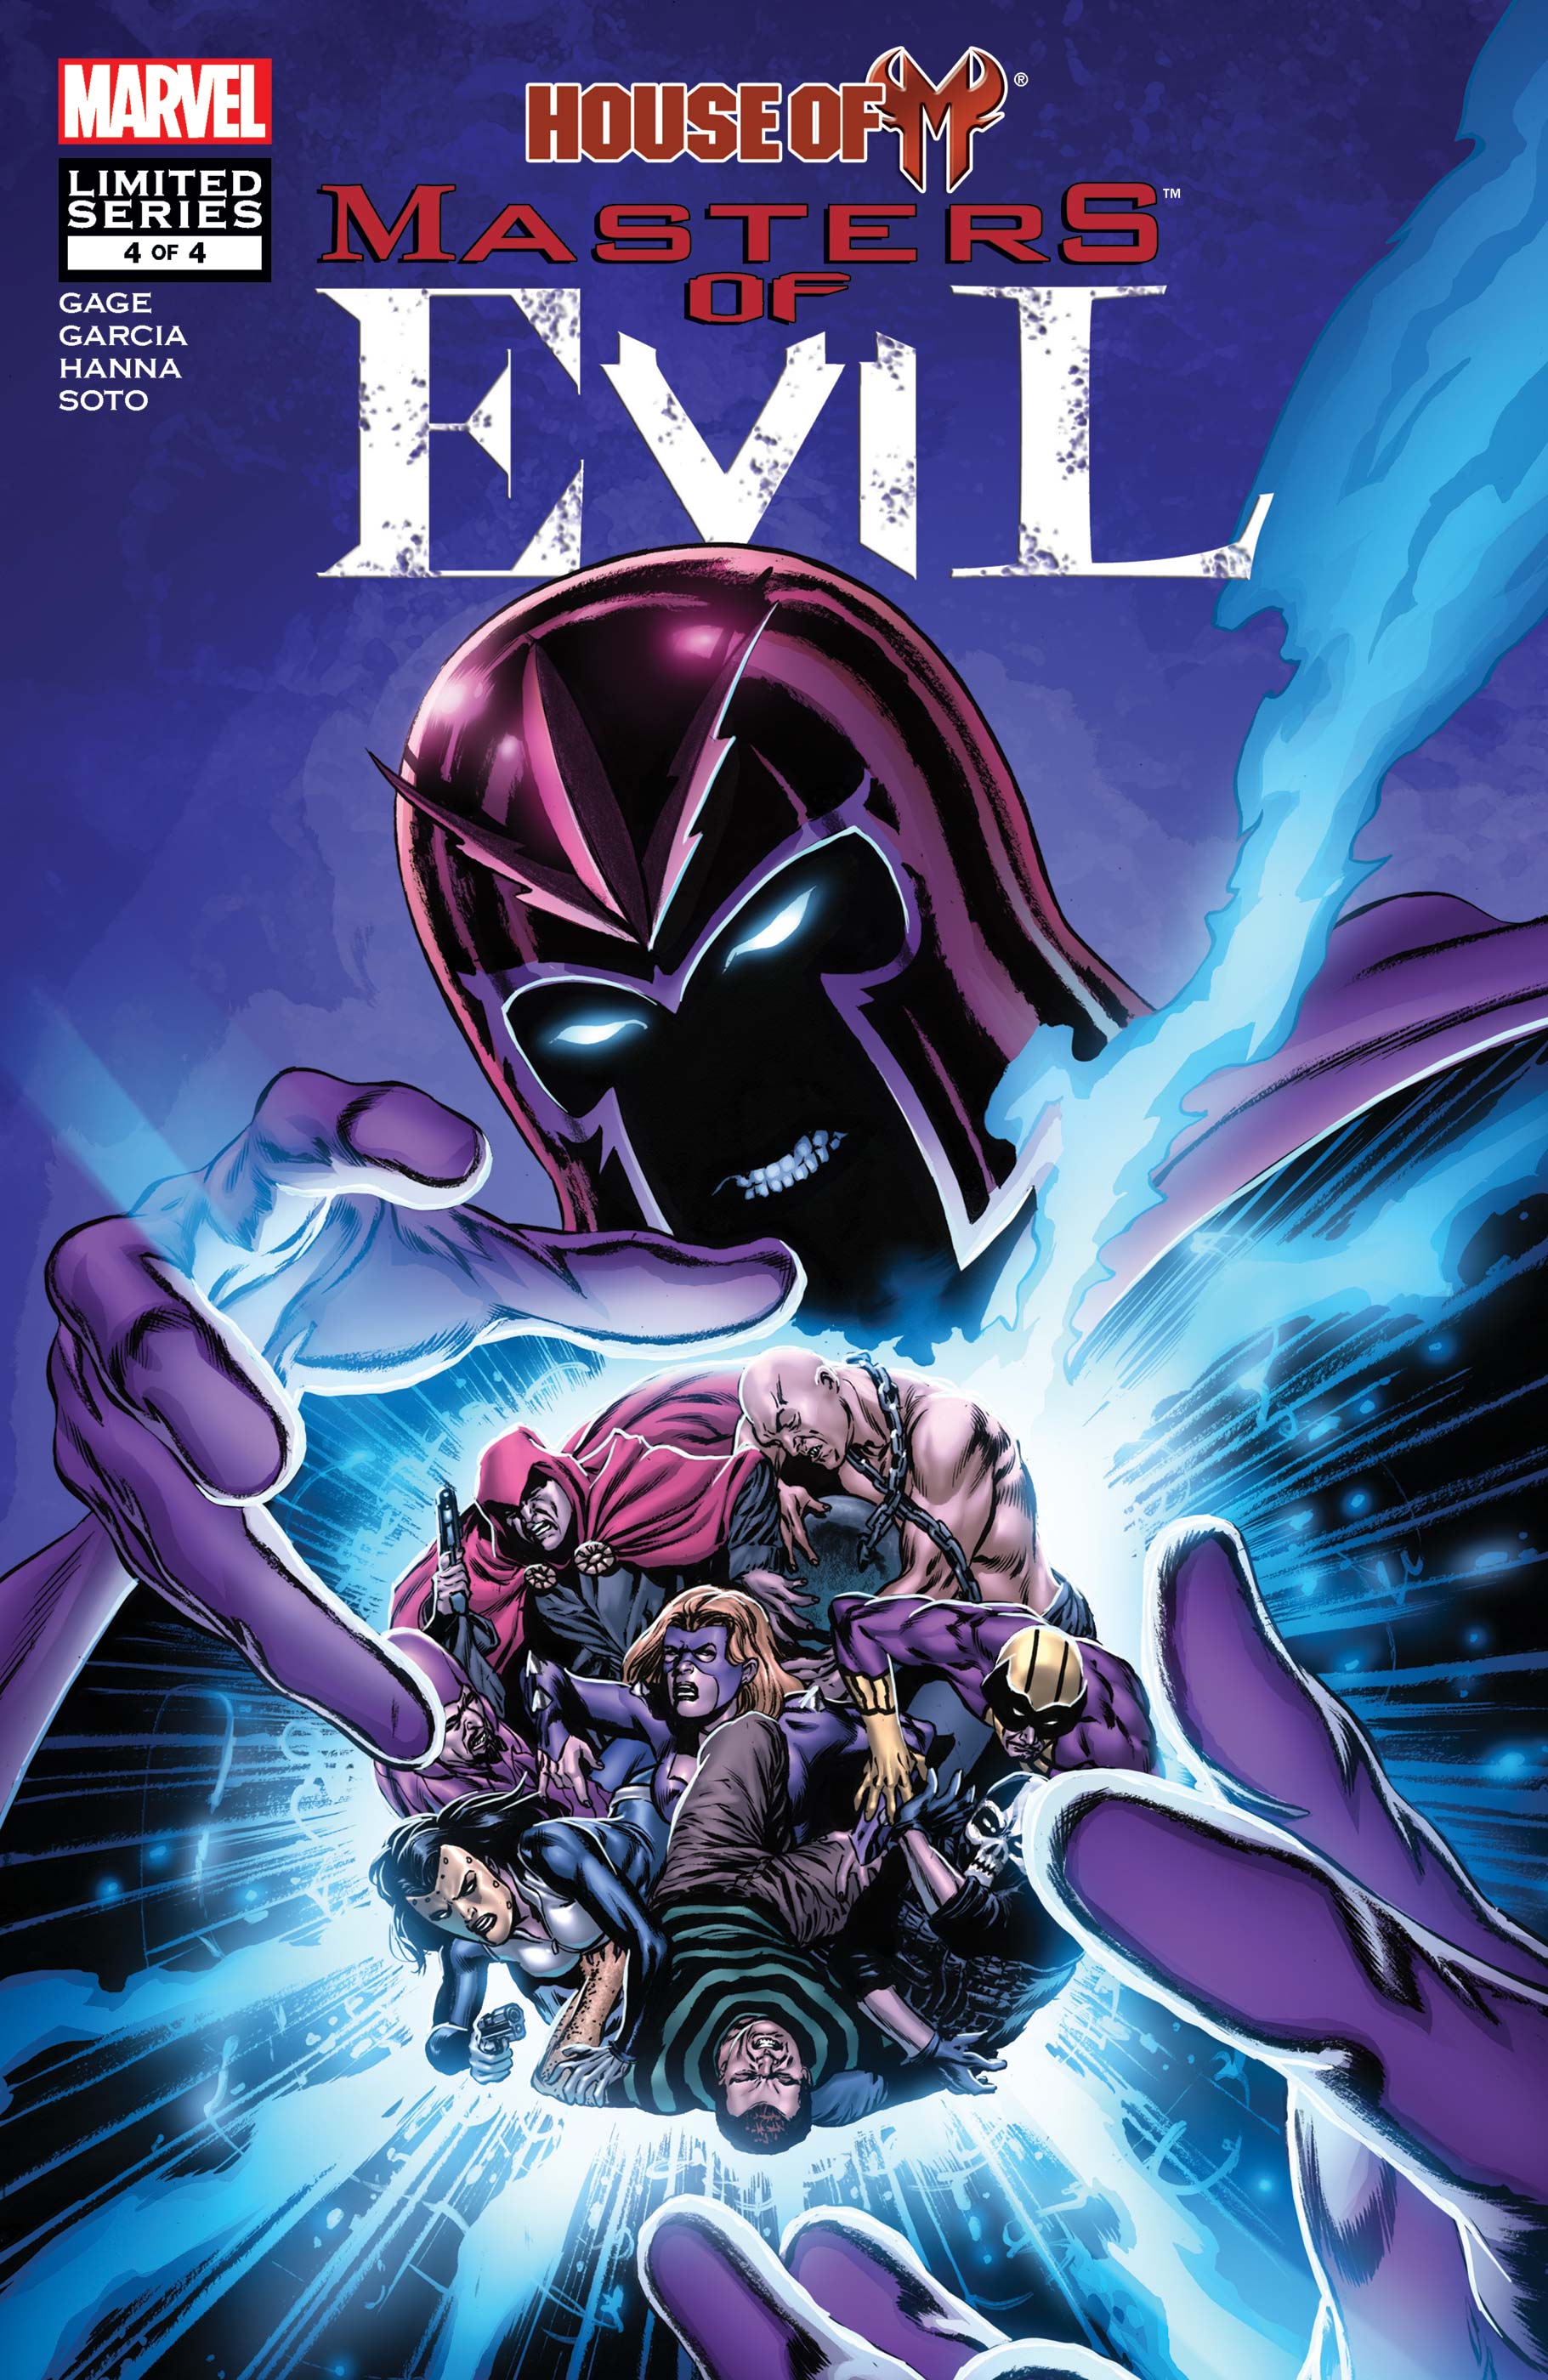 House of m masters of evil